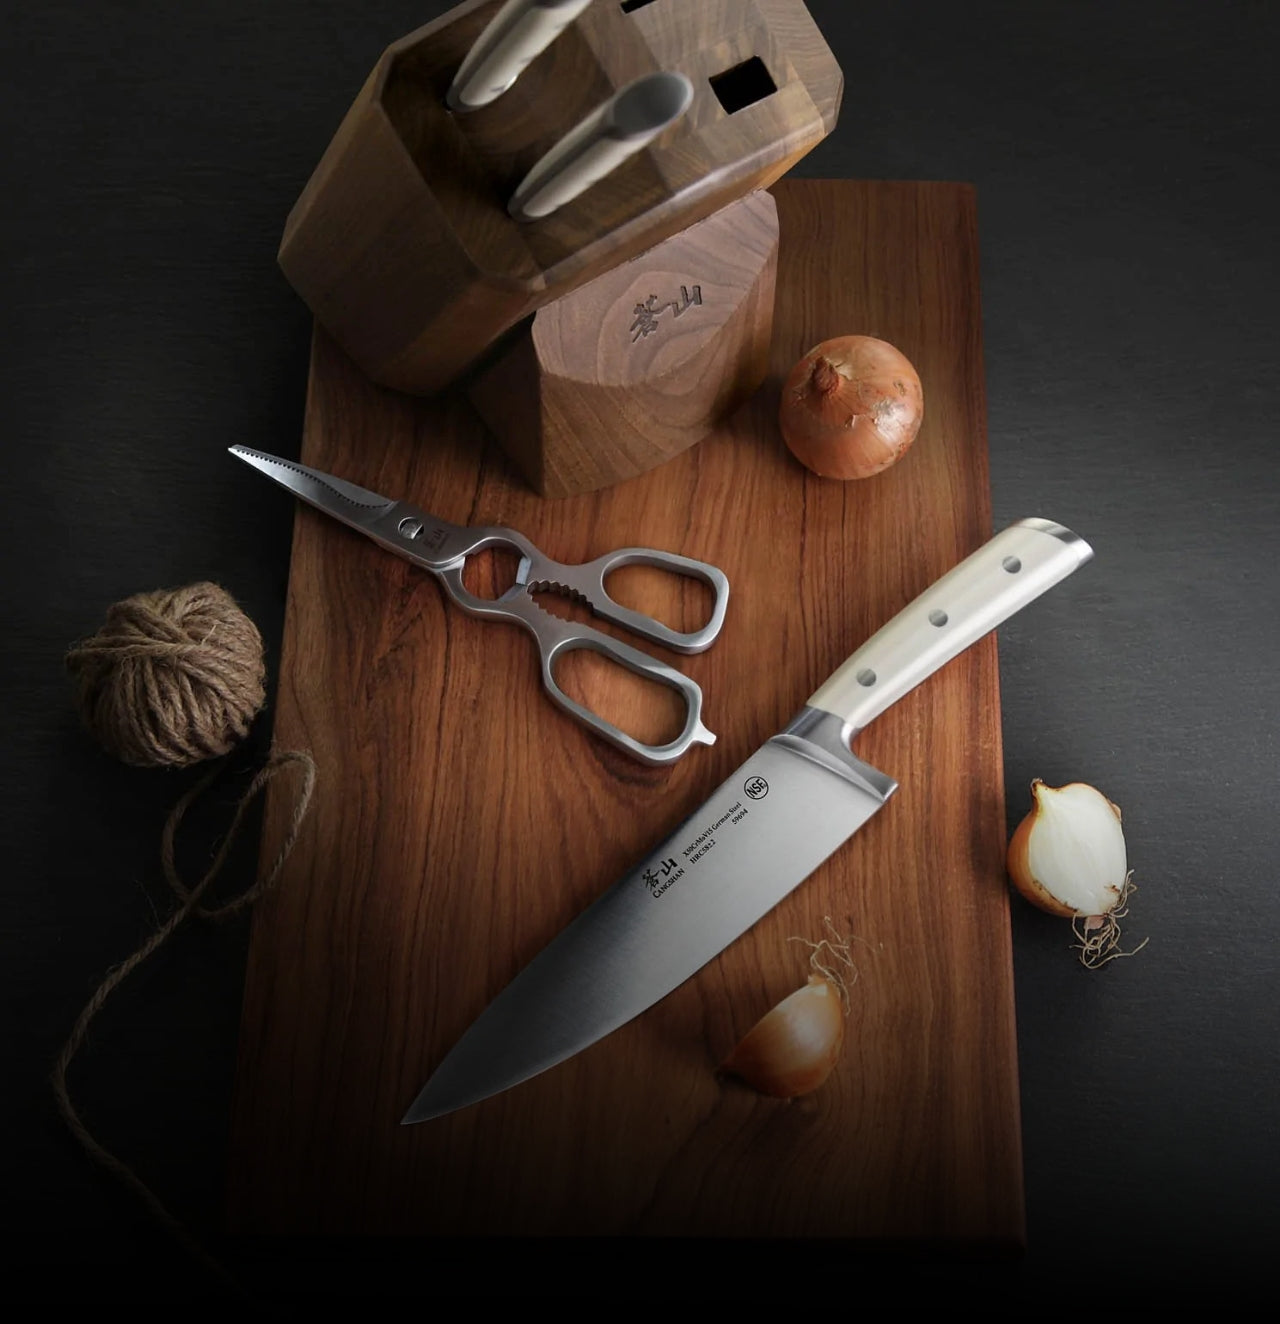 Cangshan Cutlery (@cangshancutlery) • Instagram photos and videos